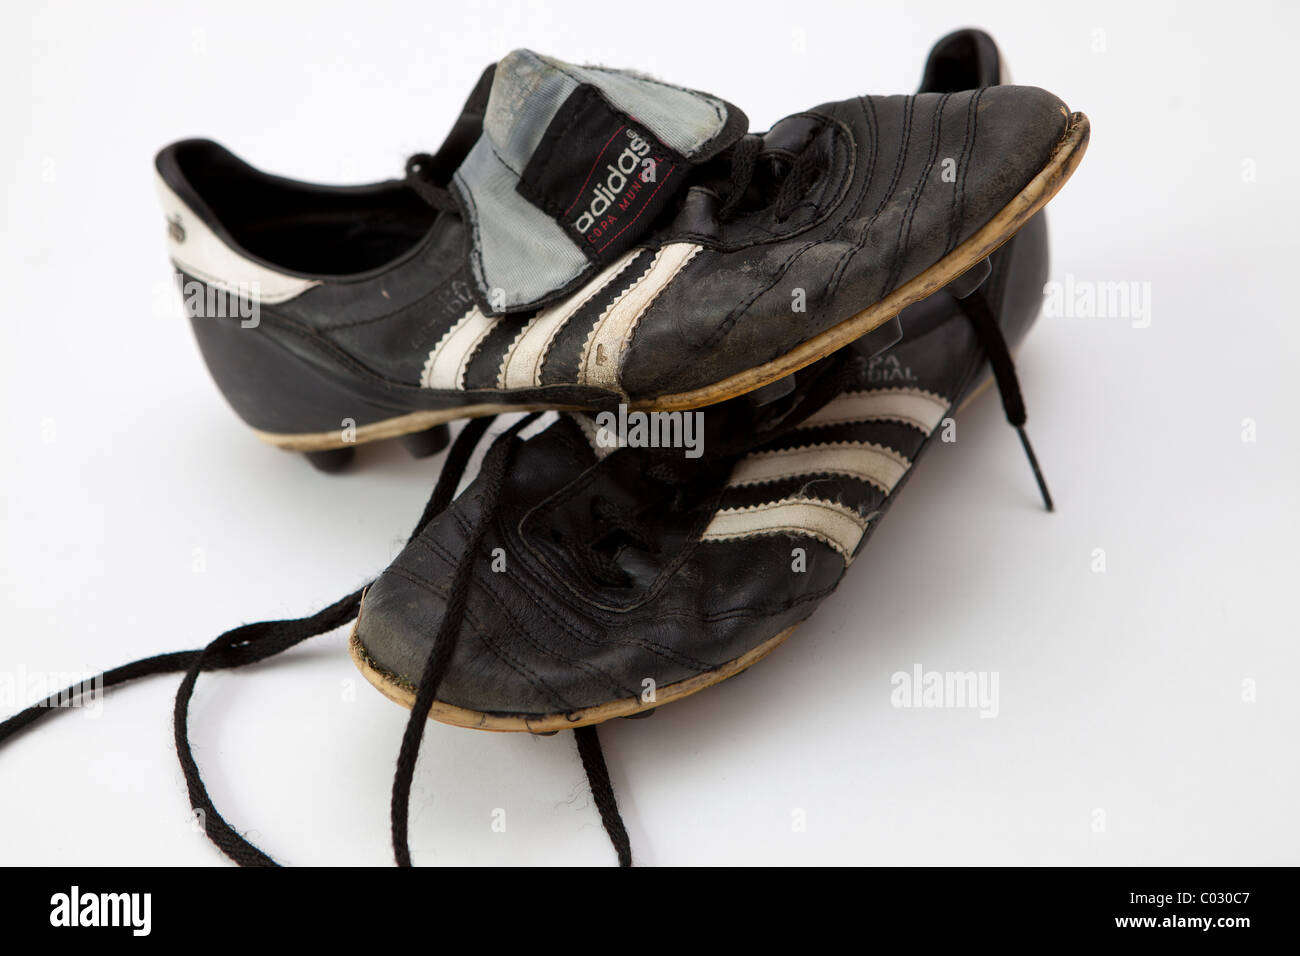 adidas old football shoes